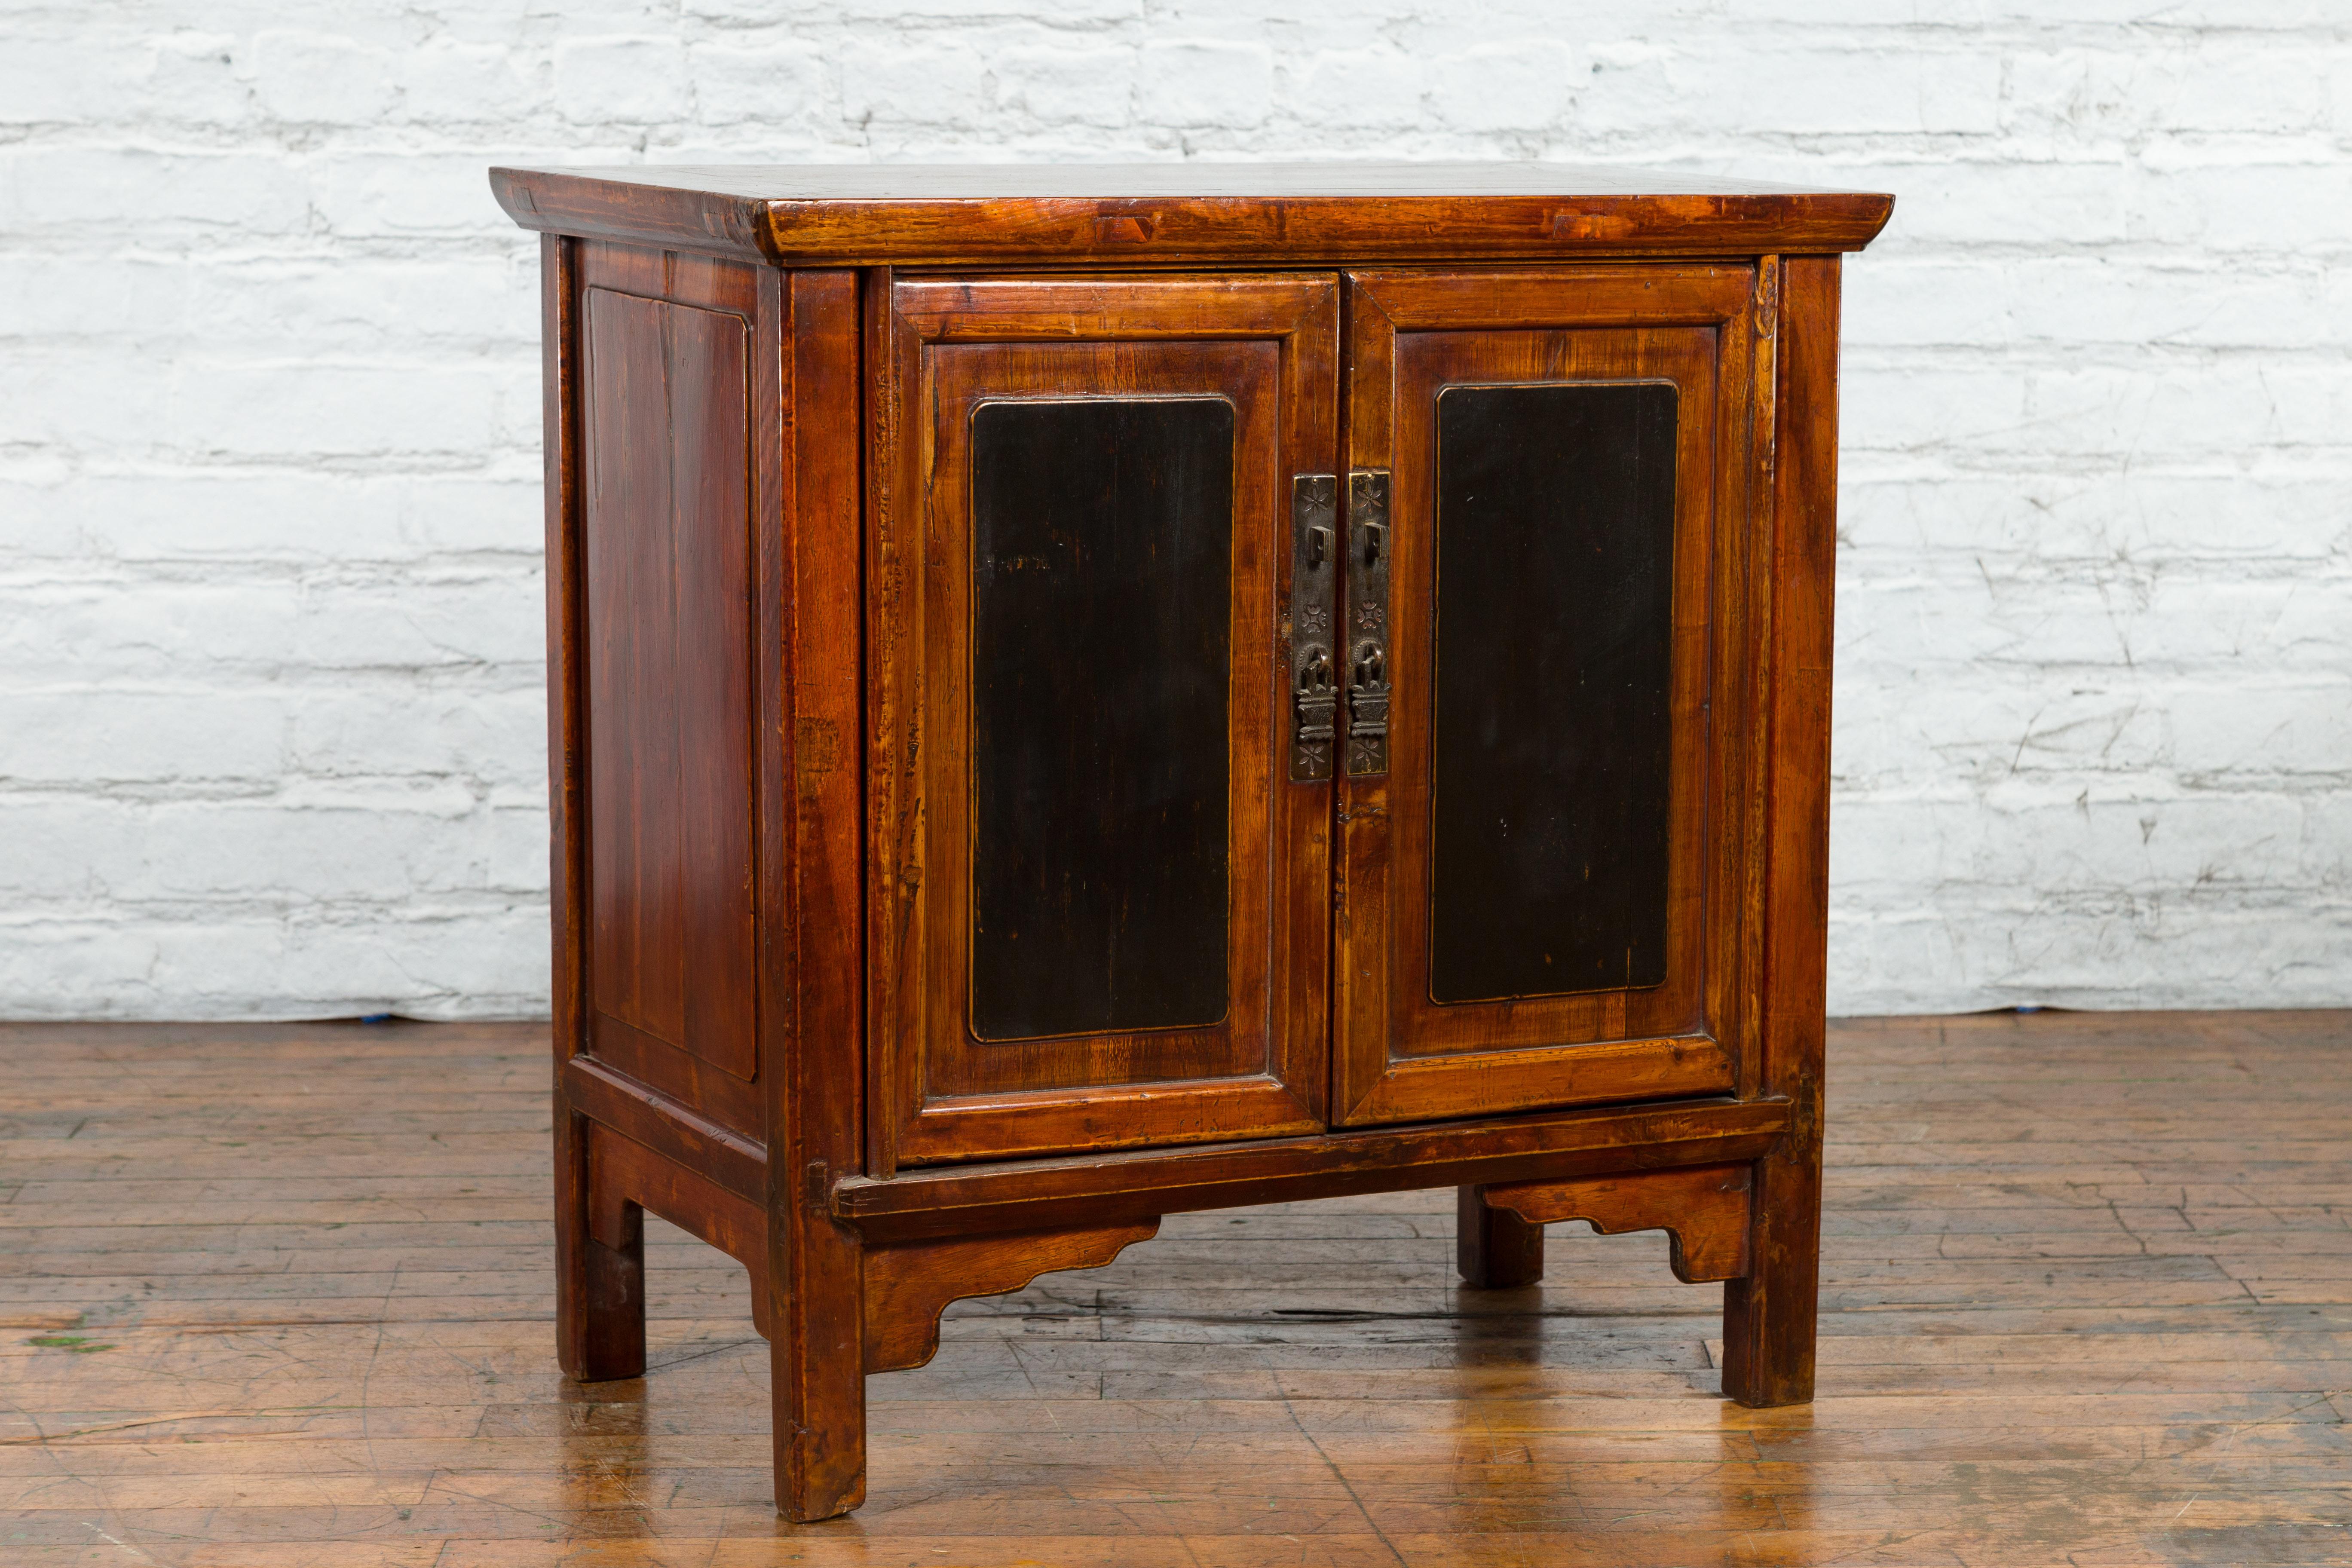 A Chinese antique side cabinet from the early 20th century with brown and black lacquer, brass hardware and carved spandrels. Created in China during the early years of the 20th century, this side cabinet features a rectangular top with central